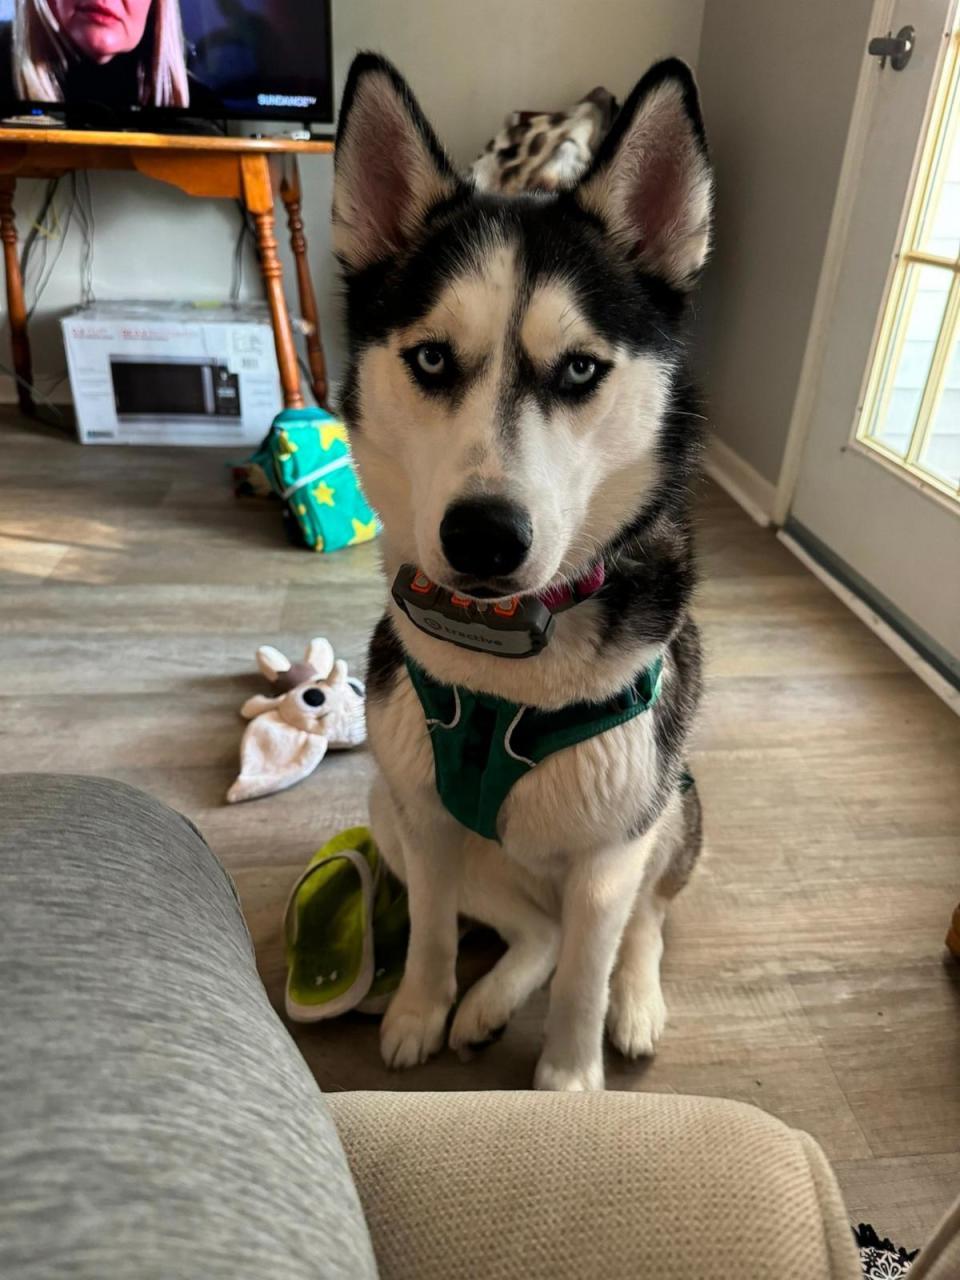 PHOTO: Samantha Griffin says Luna, who is estimated to be about 2 years old, is a “very loving” and “very smart” canine who can open doors and containers. (Samantha Griffin)